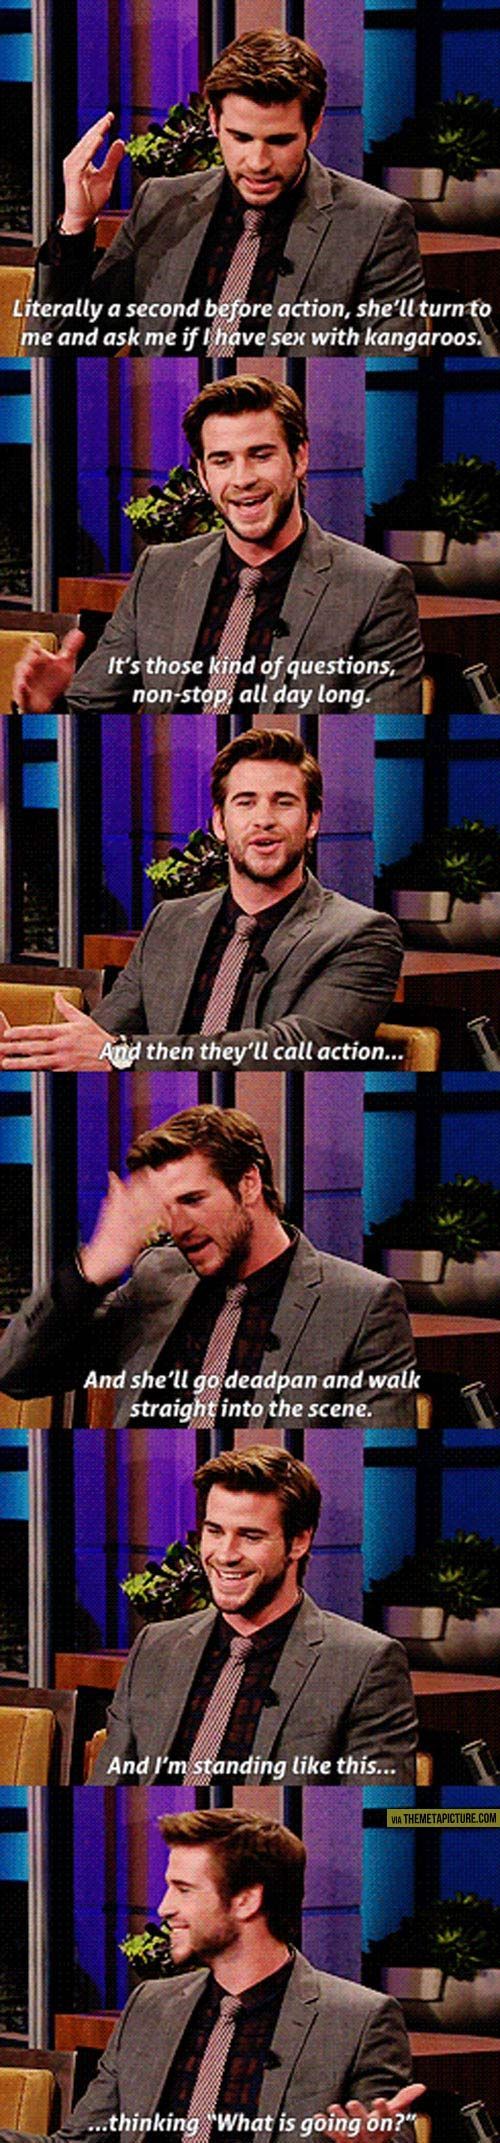 Liam Hemsworth on working with Jennifer Lawrence…